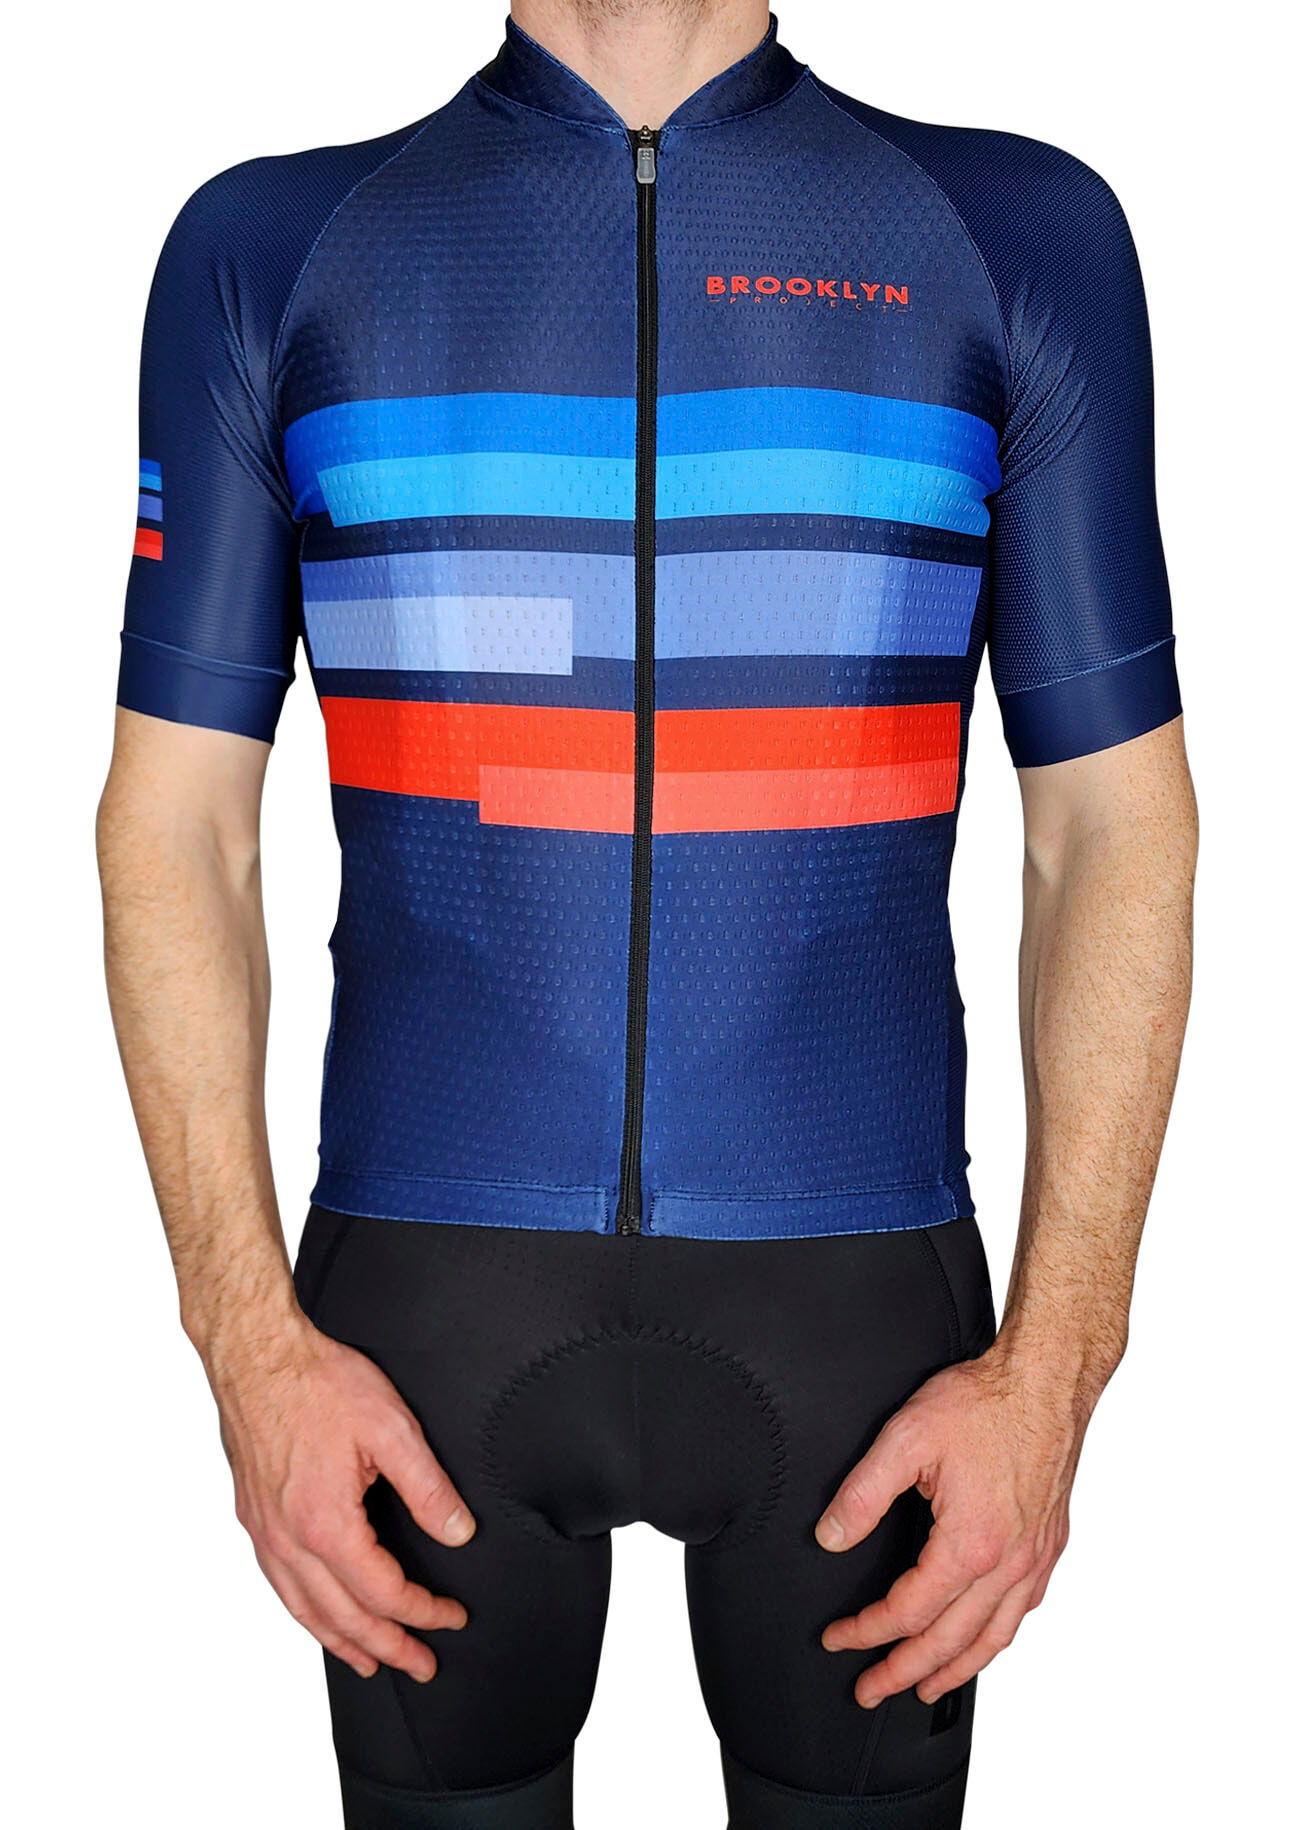 Ventou offer custom cycling wear for companies and teams, as well as ...